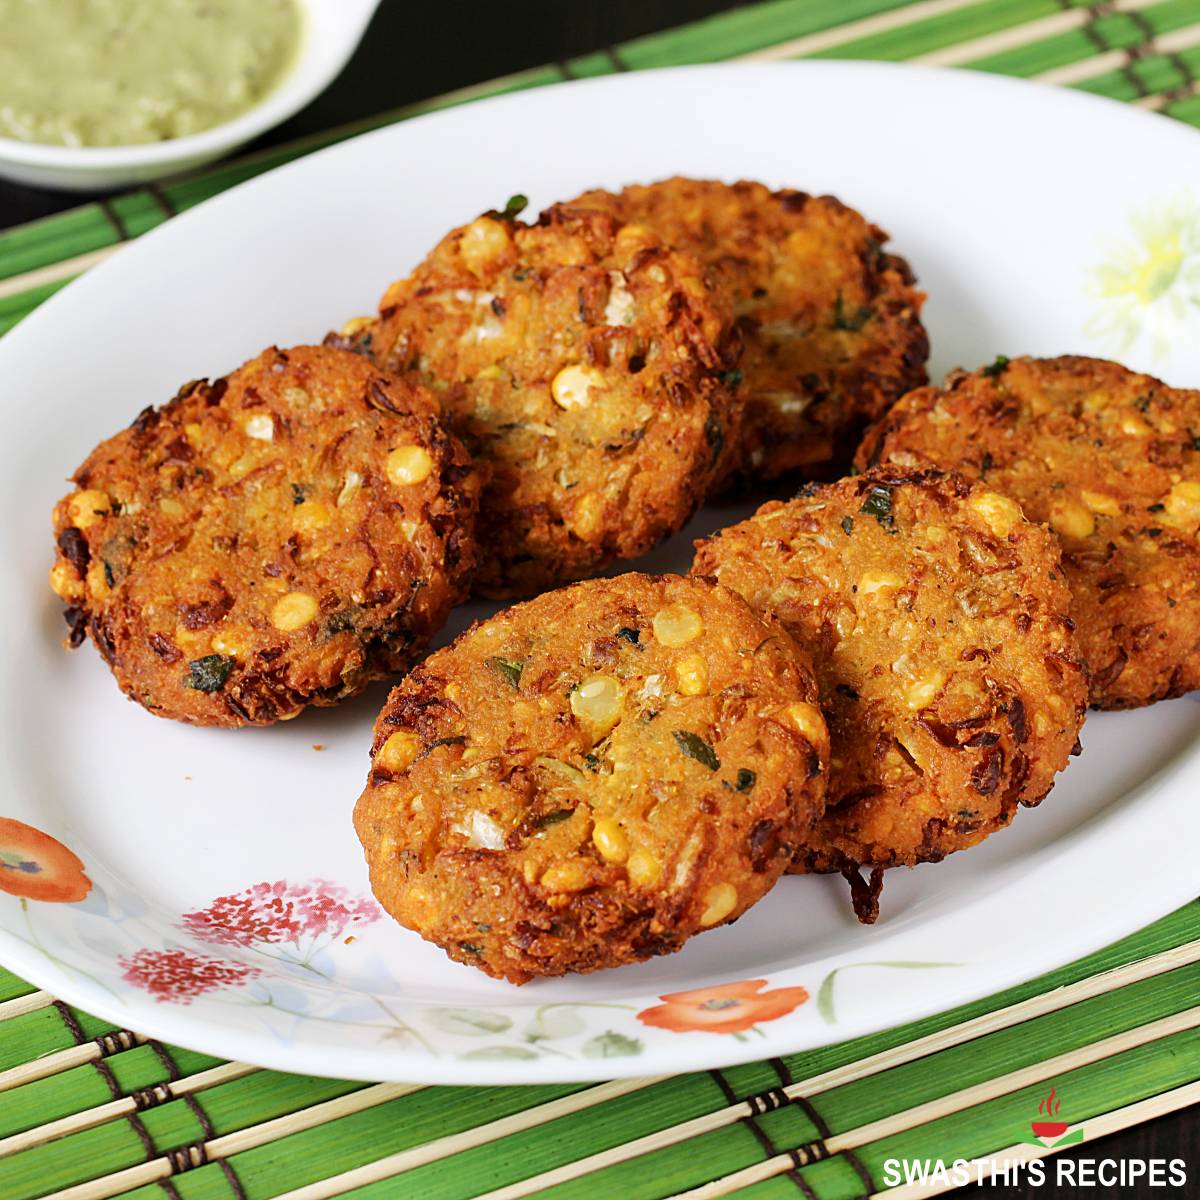 Cabbage vada also known as cabbage patties